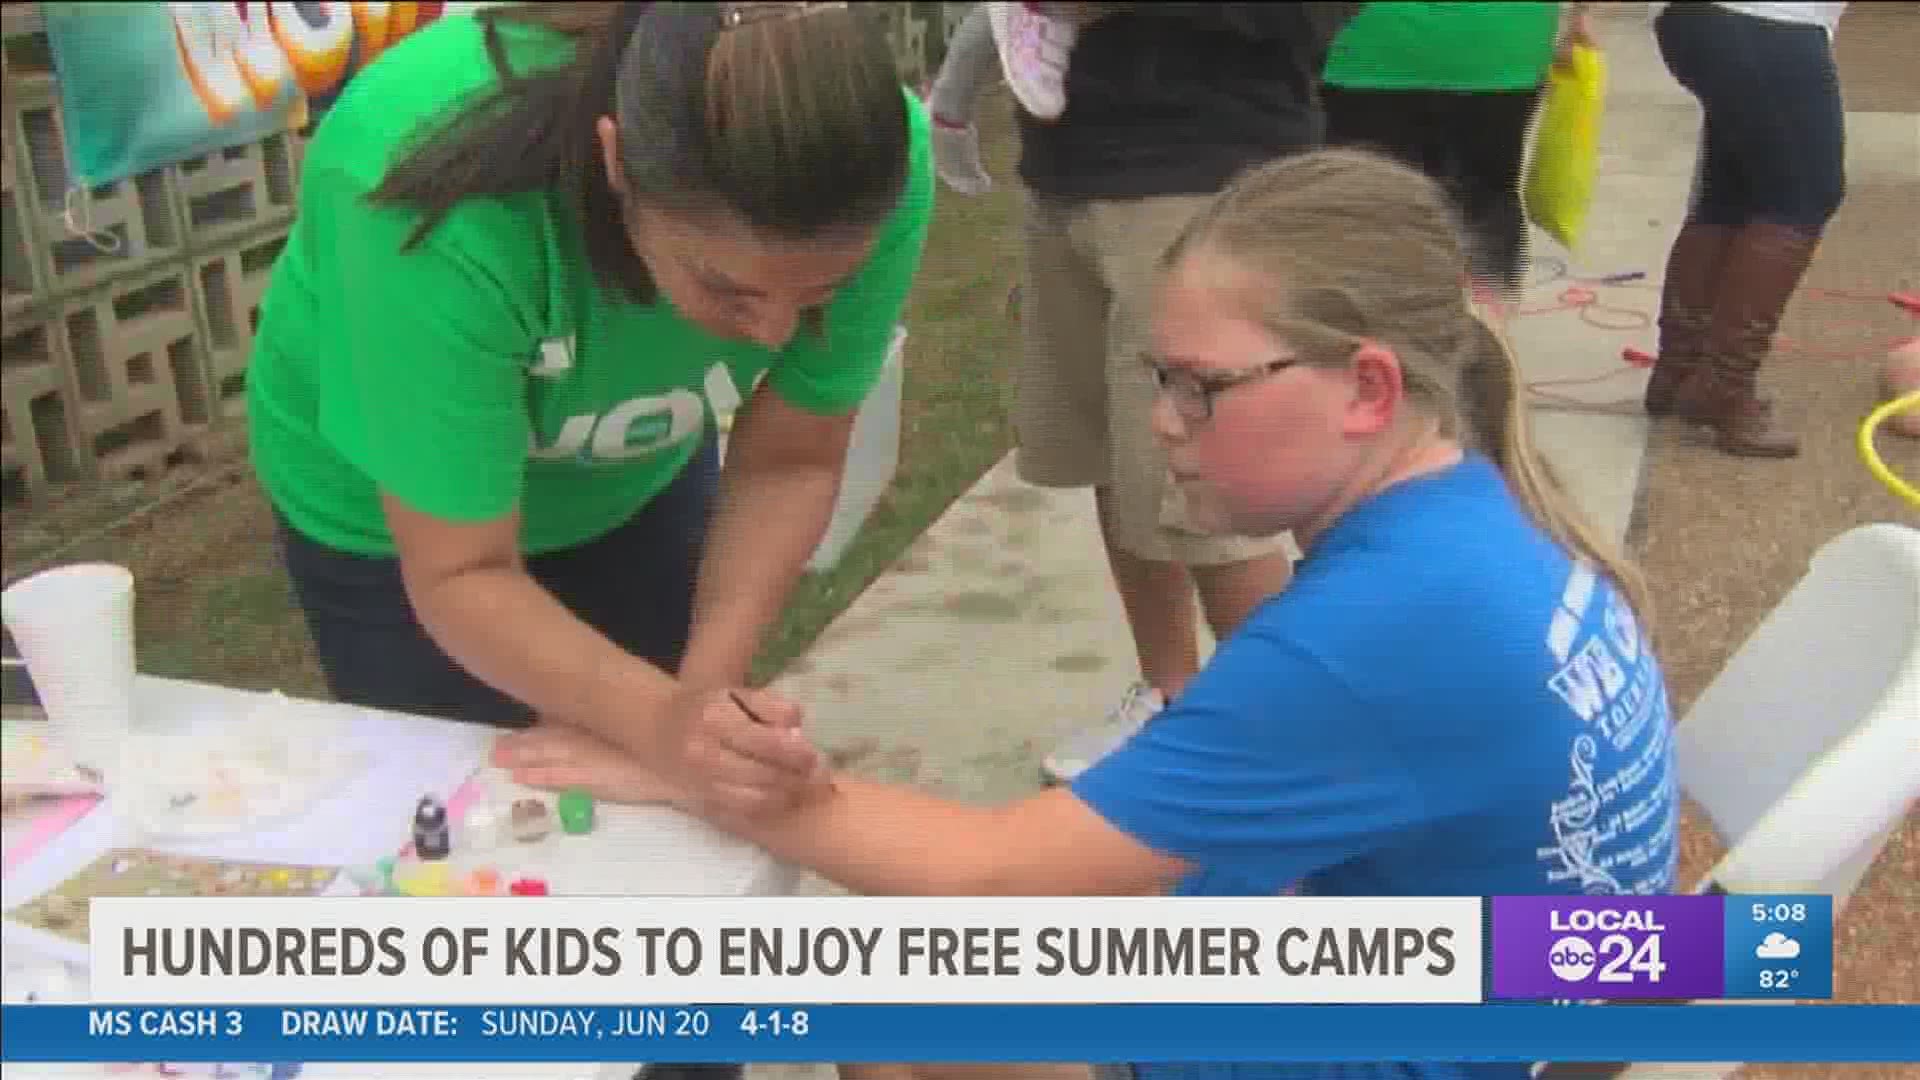 City of Memphis free summer camps begin Monday with 1,200 kids